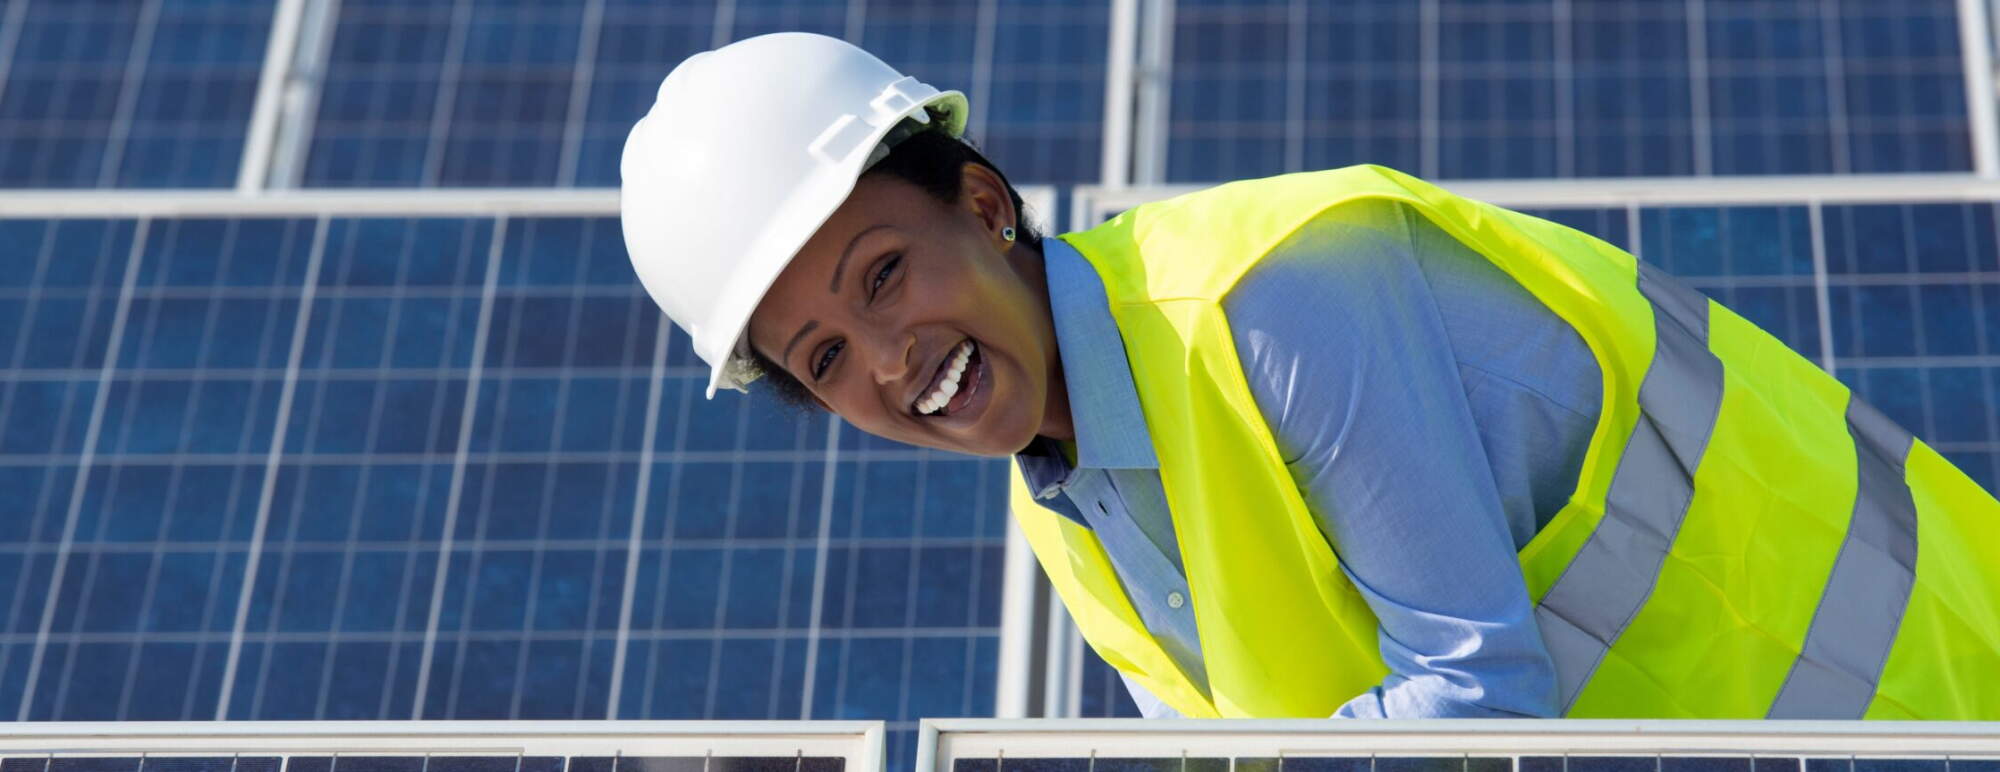 A woman stands in a solar farm smiling at the camera. She is wearing a yellow construction vest and hard hat